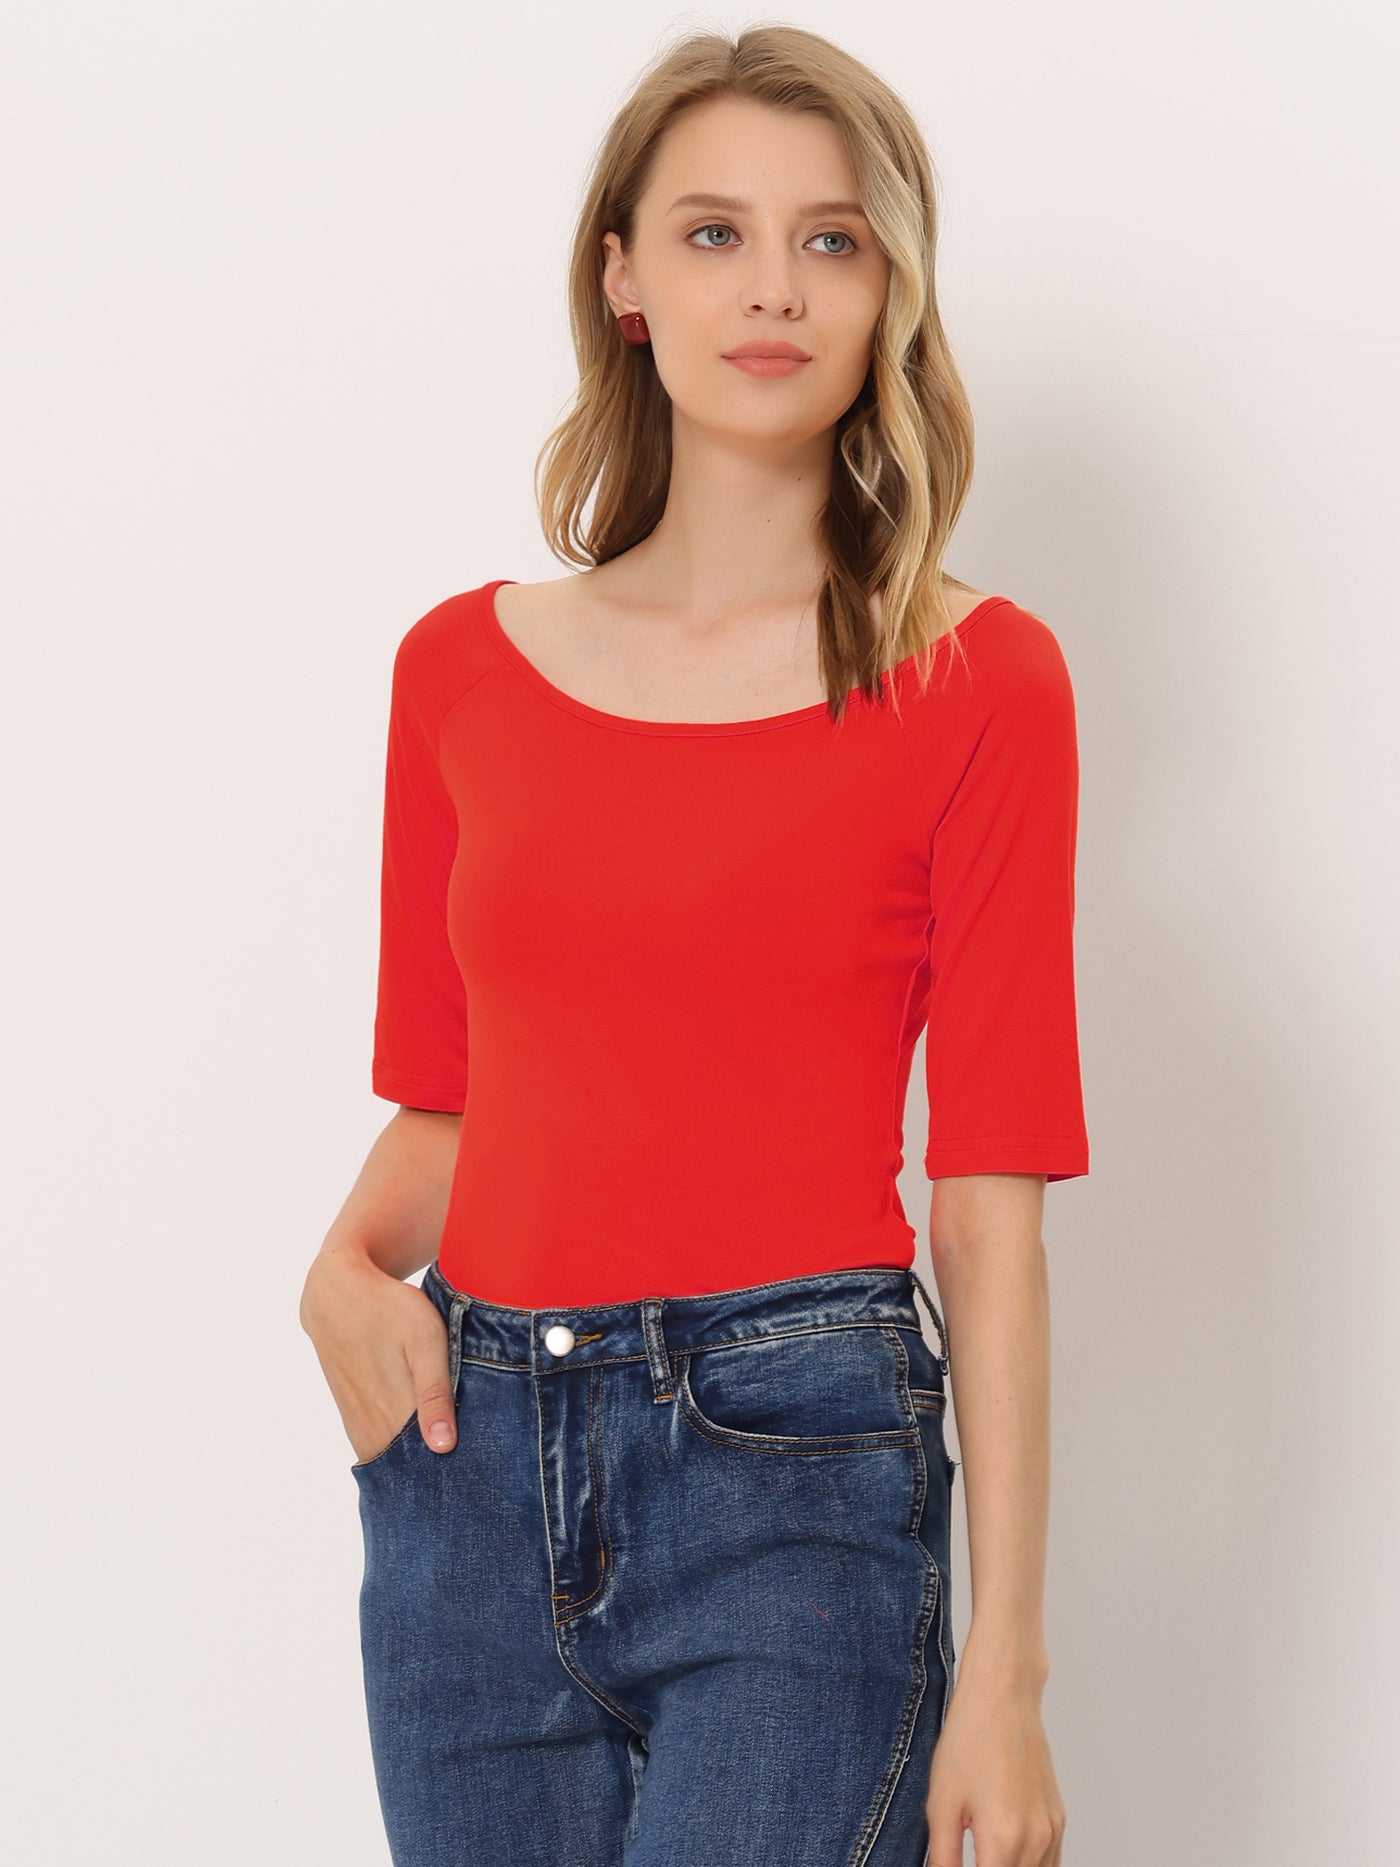 Allegra K Half Sleeves Scoop Neck Fitted Layering Soft T-Shirt